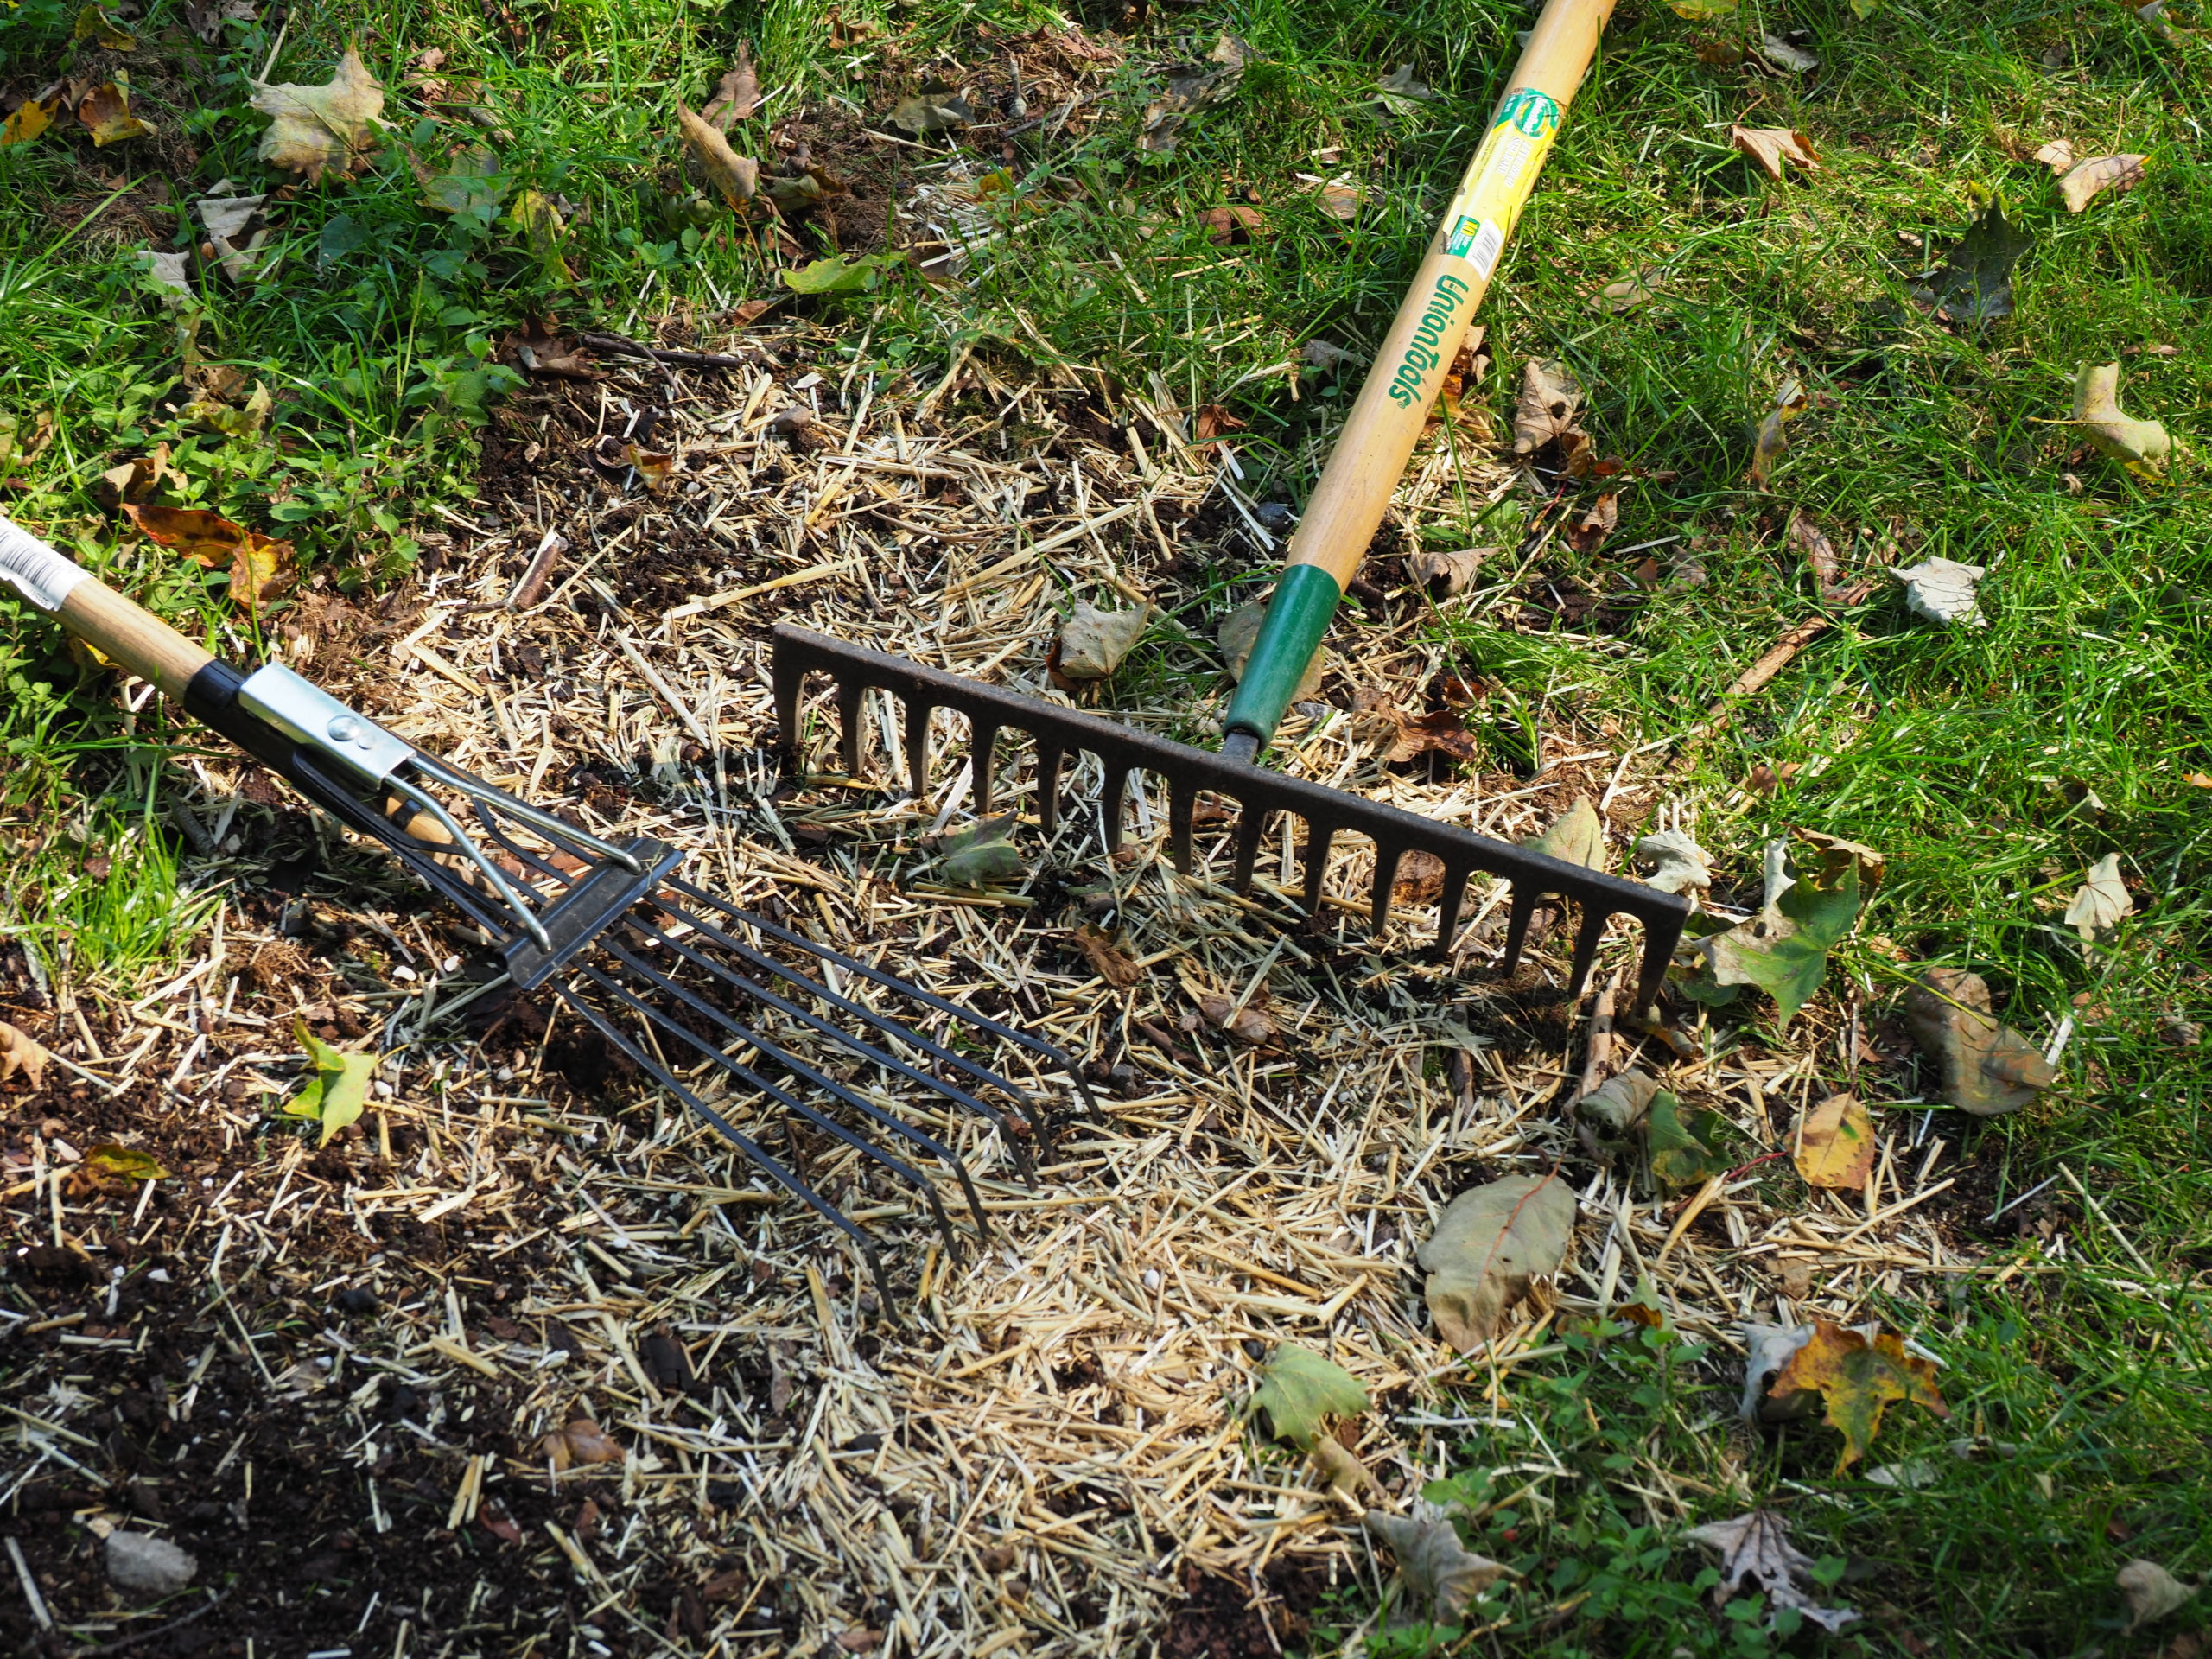 The two tools used in this project were a 5-inch steel fan rake to rough up the patch area and remove the dead grass and weeds.  The metal tine rake has 3 inch tines over 15 inches and is used for leveling, raking and tamping.